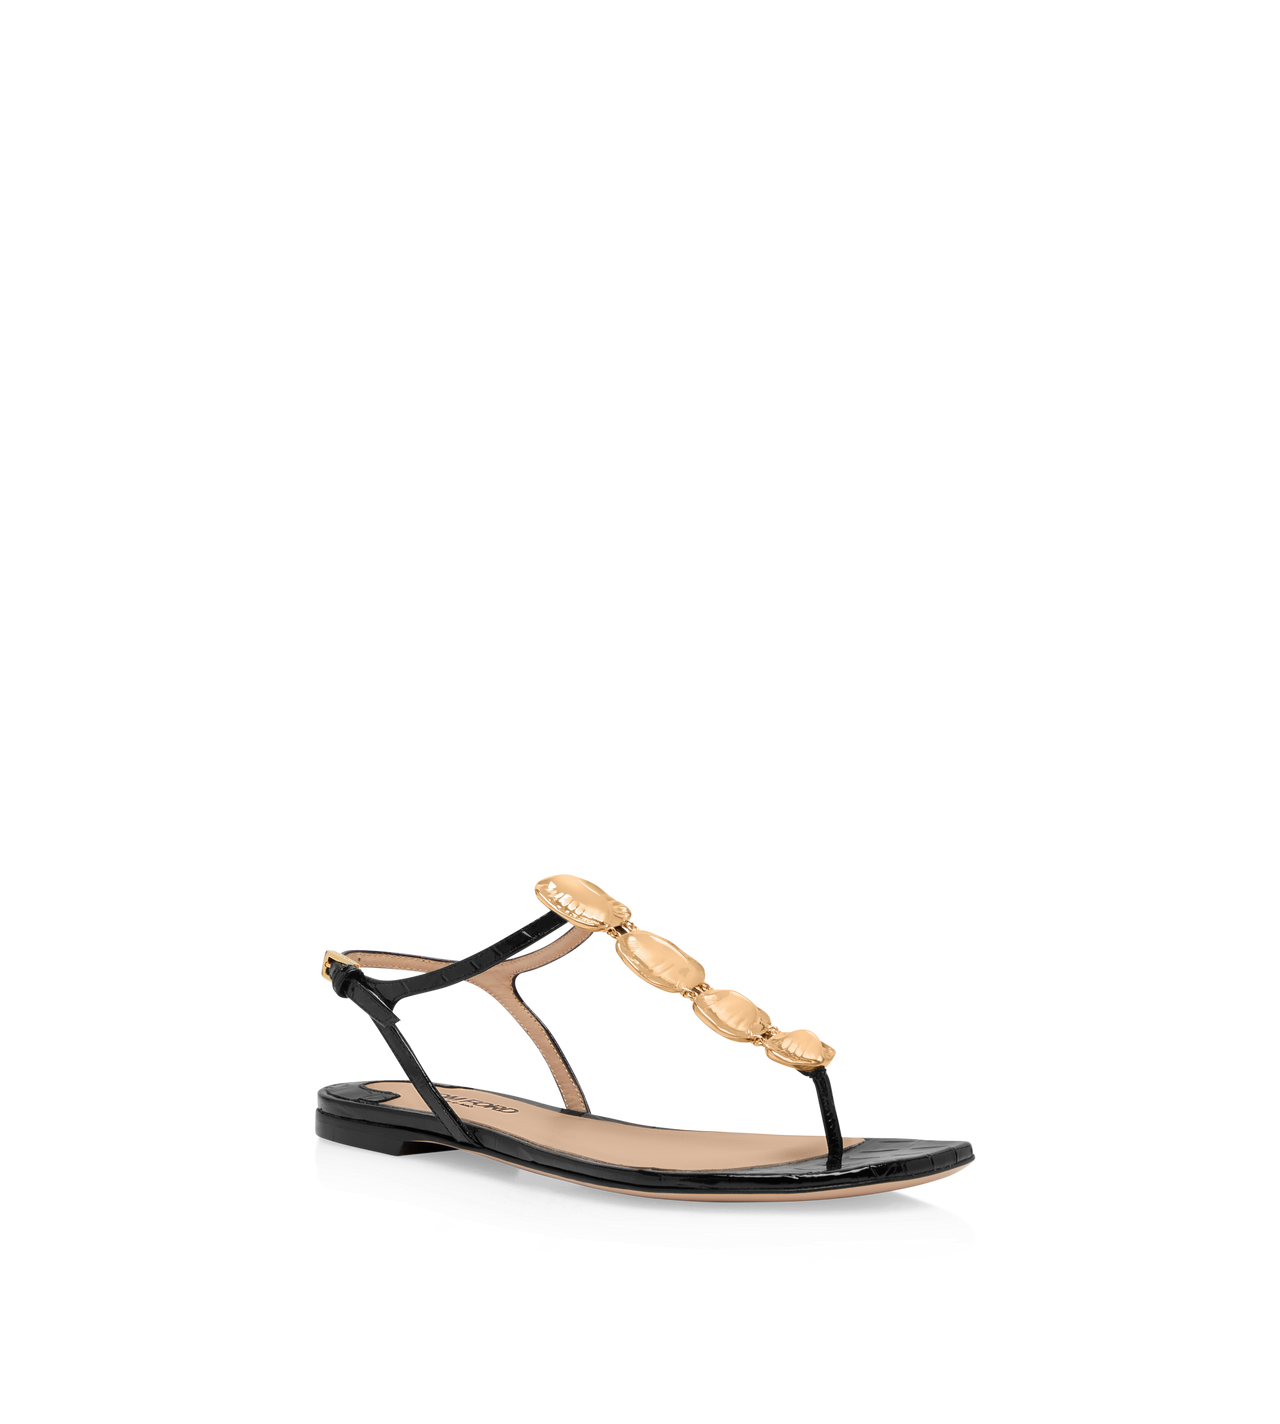 STAMPED CROC LEATHER TITAN T STRAP THONG SANDAL